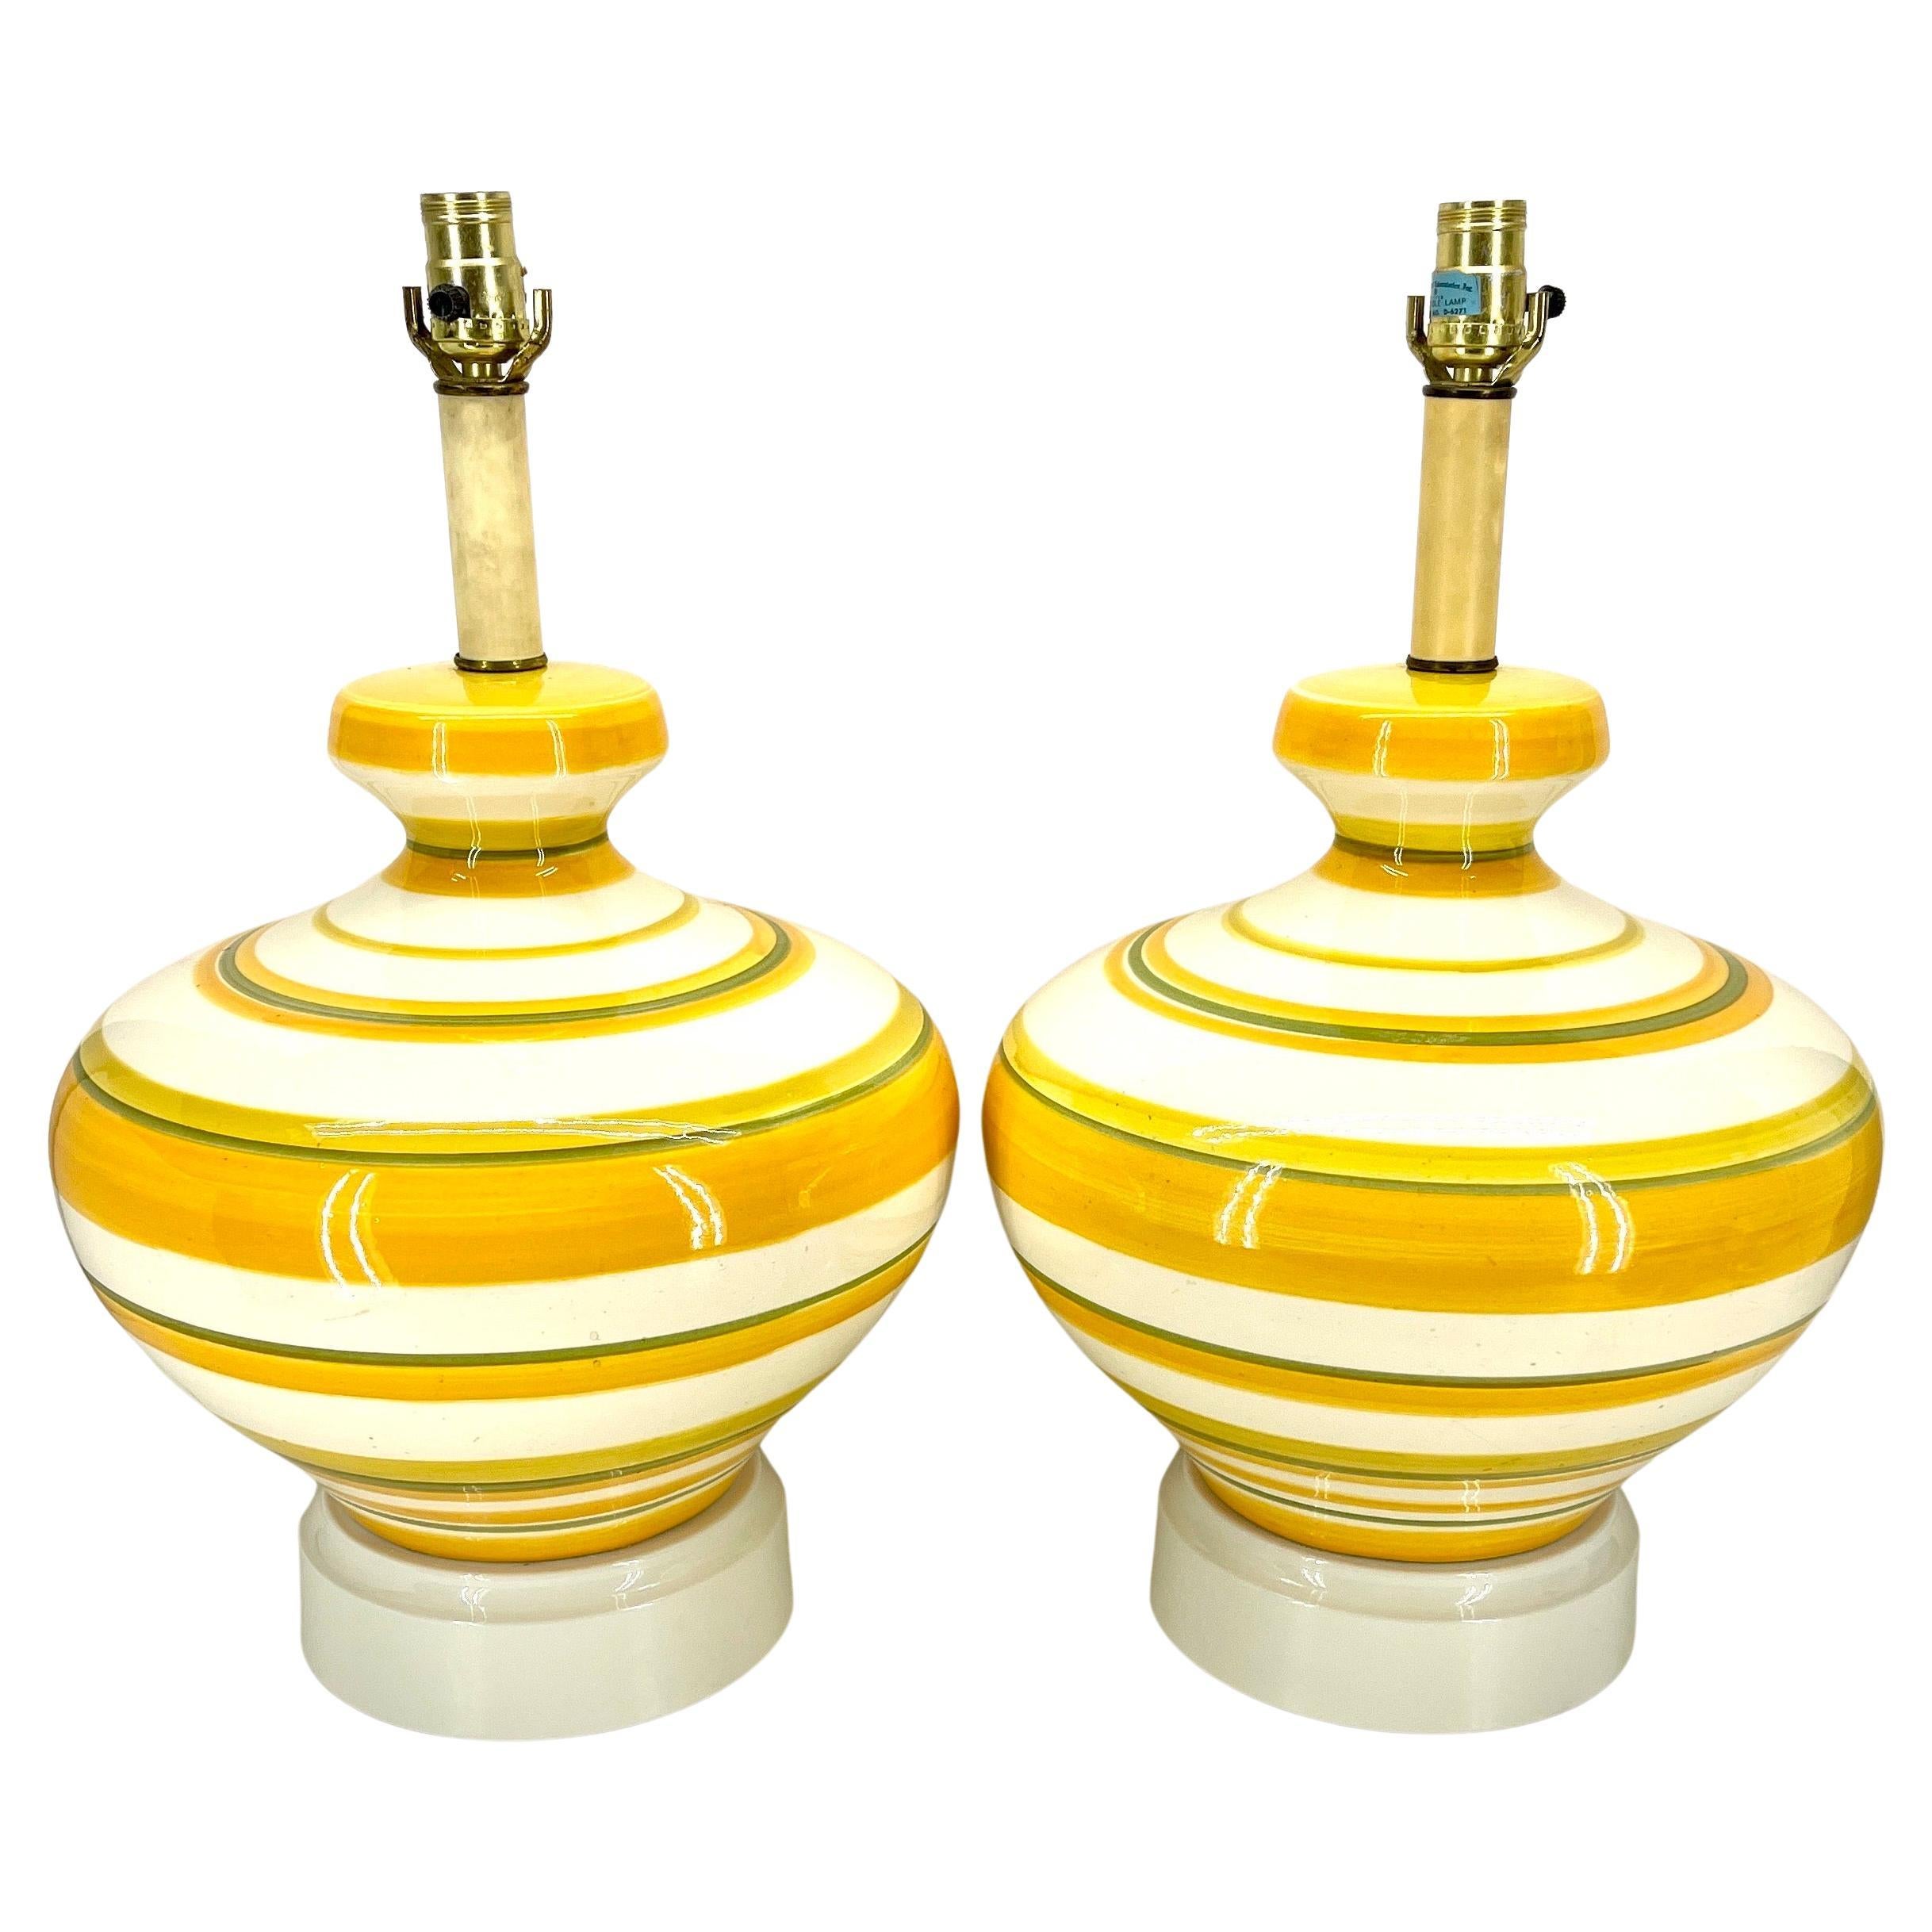 Large Mid-Century Modern Pair of Green and Yellow Striped Ceramic Table Lamps, circa 1960's

Substantial in size, these striped pair of lamps are perfect for the room seeking that Mid-Century vibe. This set is impressive and extremely well made with